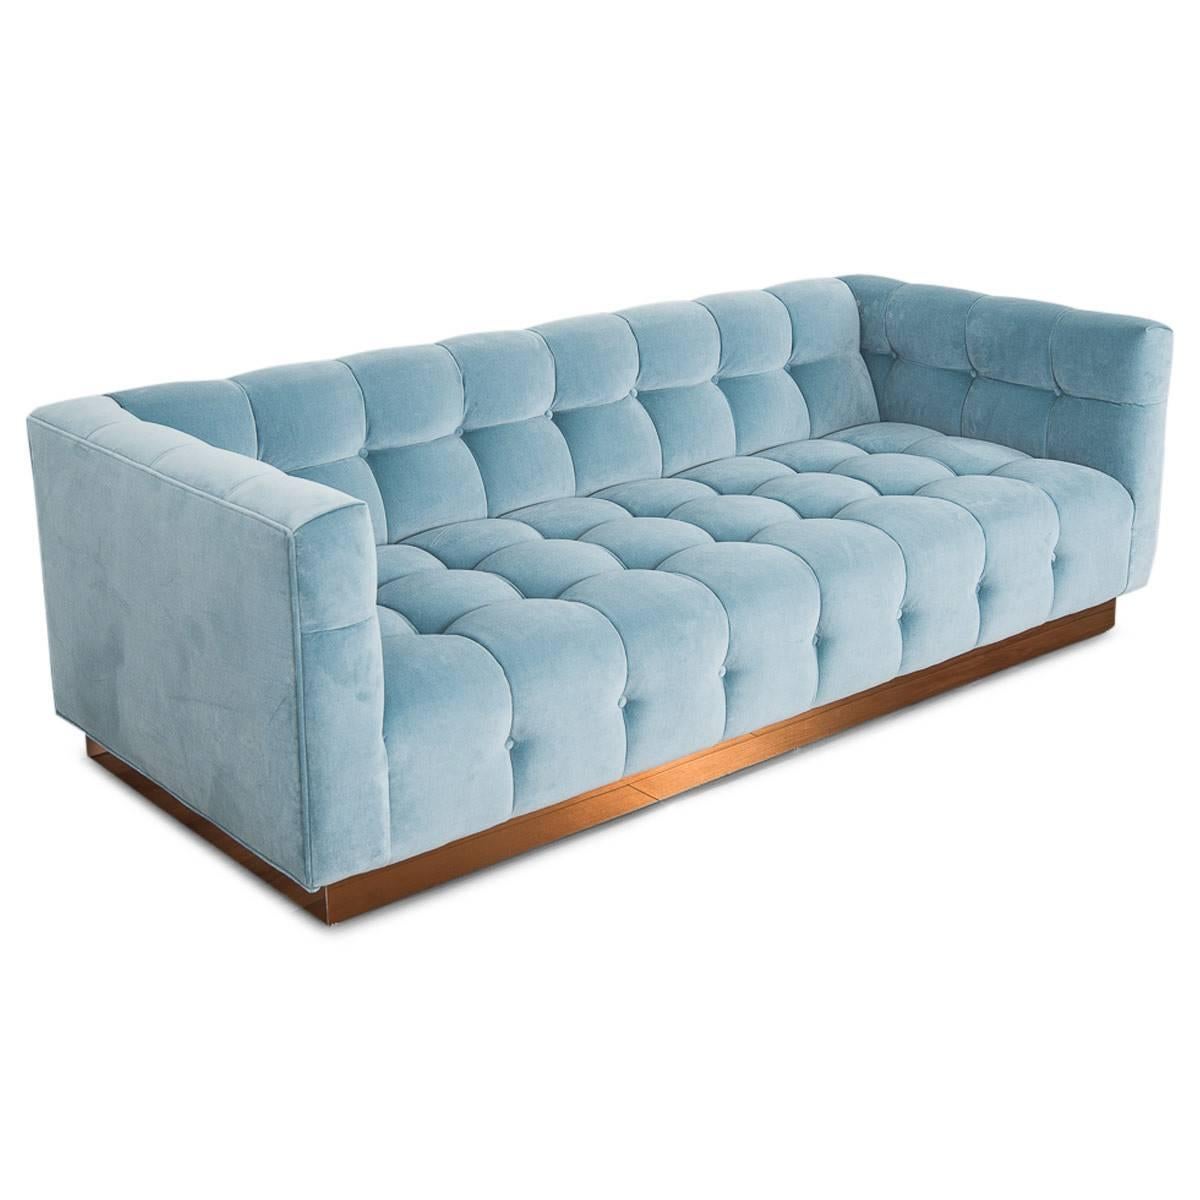 Introducing Modshop's newest addition to our Delano sofa collection. This handcrafted, gem features a copper toekick base and delicately folded biscuit tufting with pulled buttons in a soft light denim blue velvet.